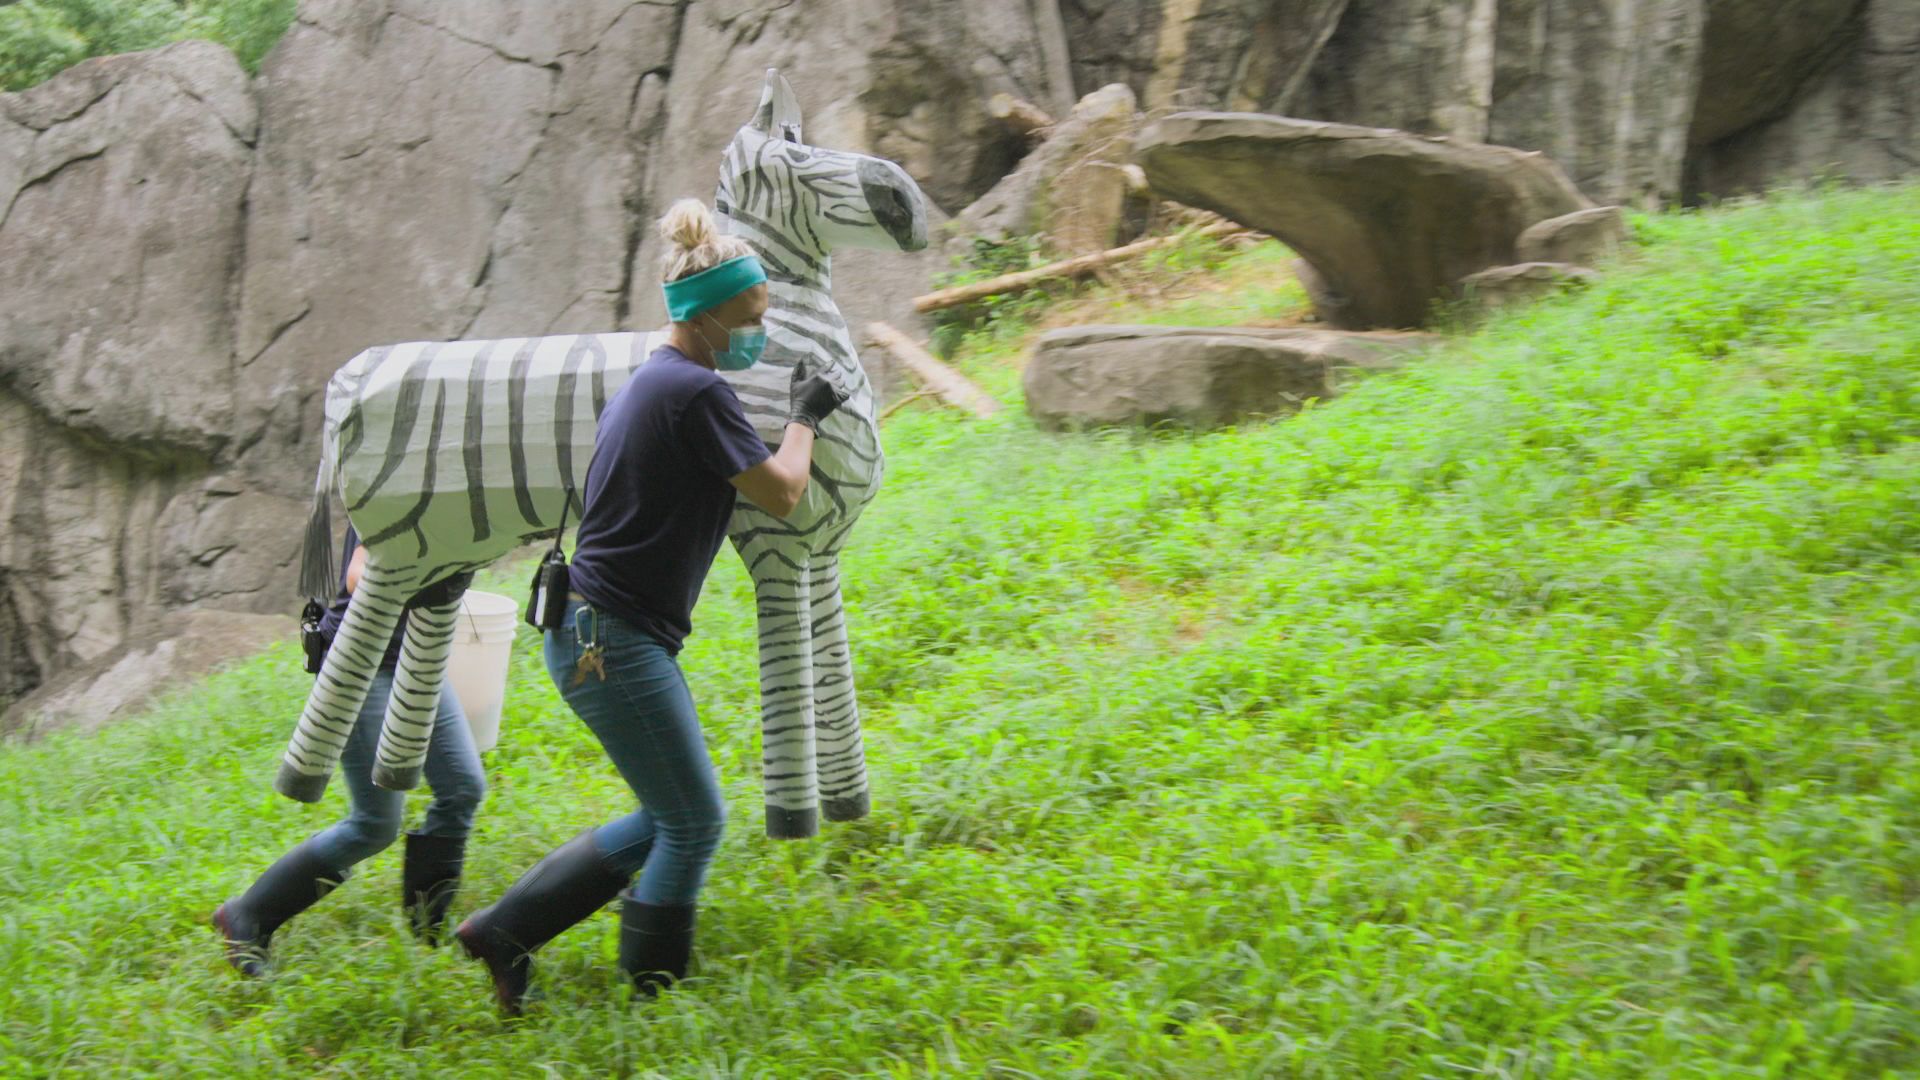 Zoo Keepers Tori Hanlin and Kristy Russell carry a papier-mâché zebra full of bones onto the... [Photo of the day - January 2022]